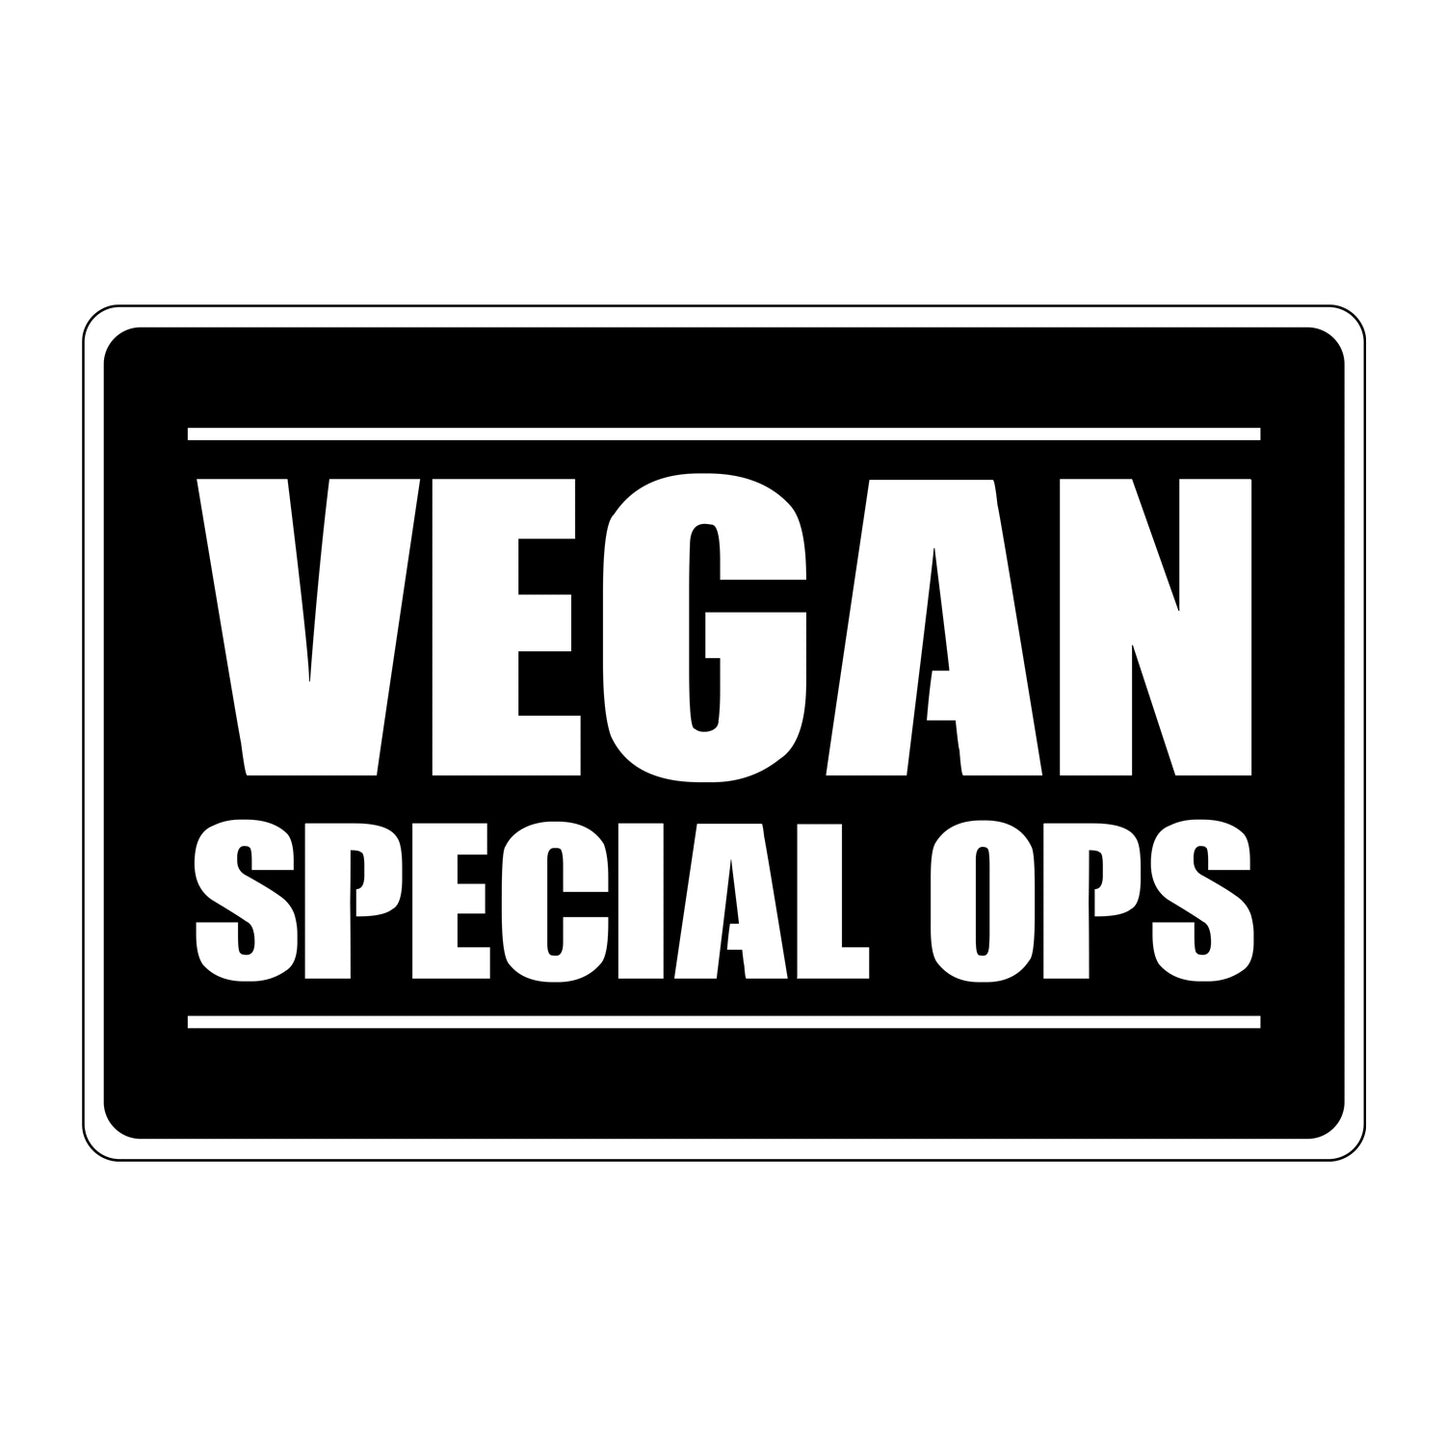 Vegan Special Ops Sticker - FREE SHIPPING